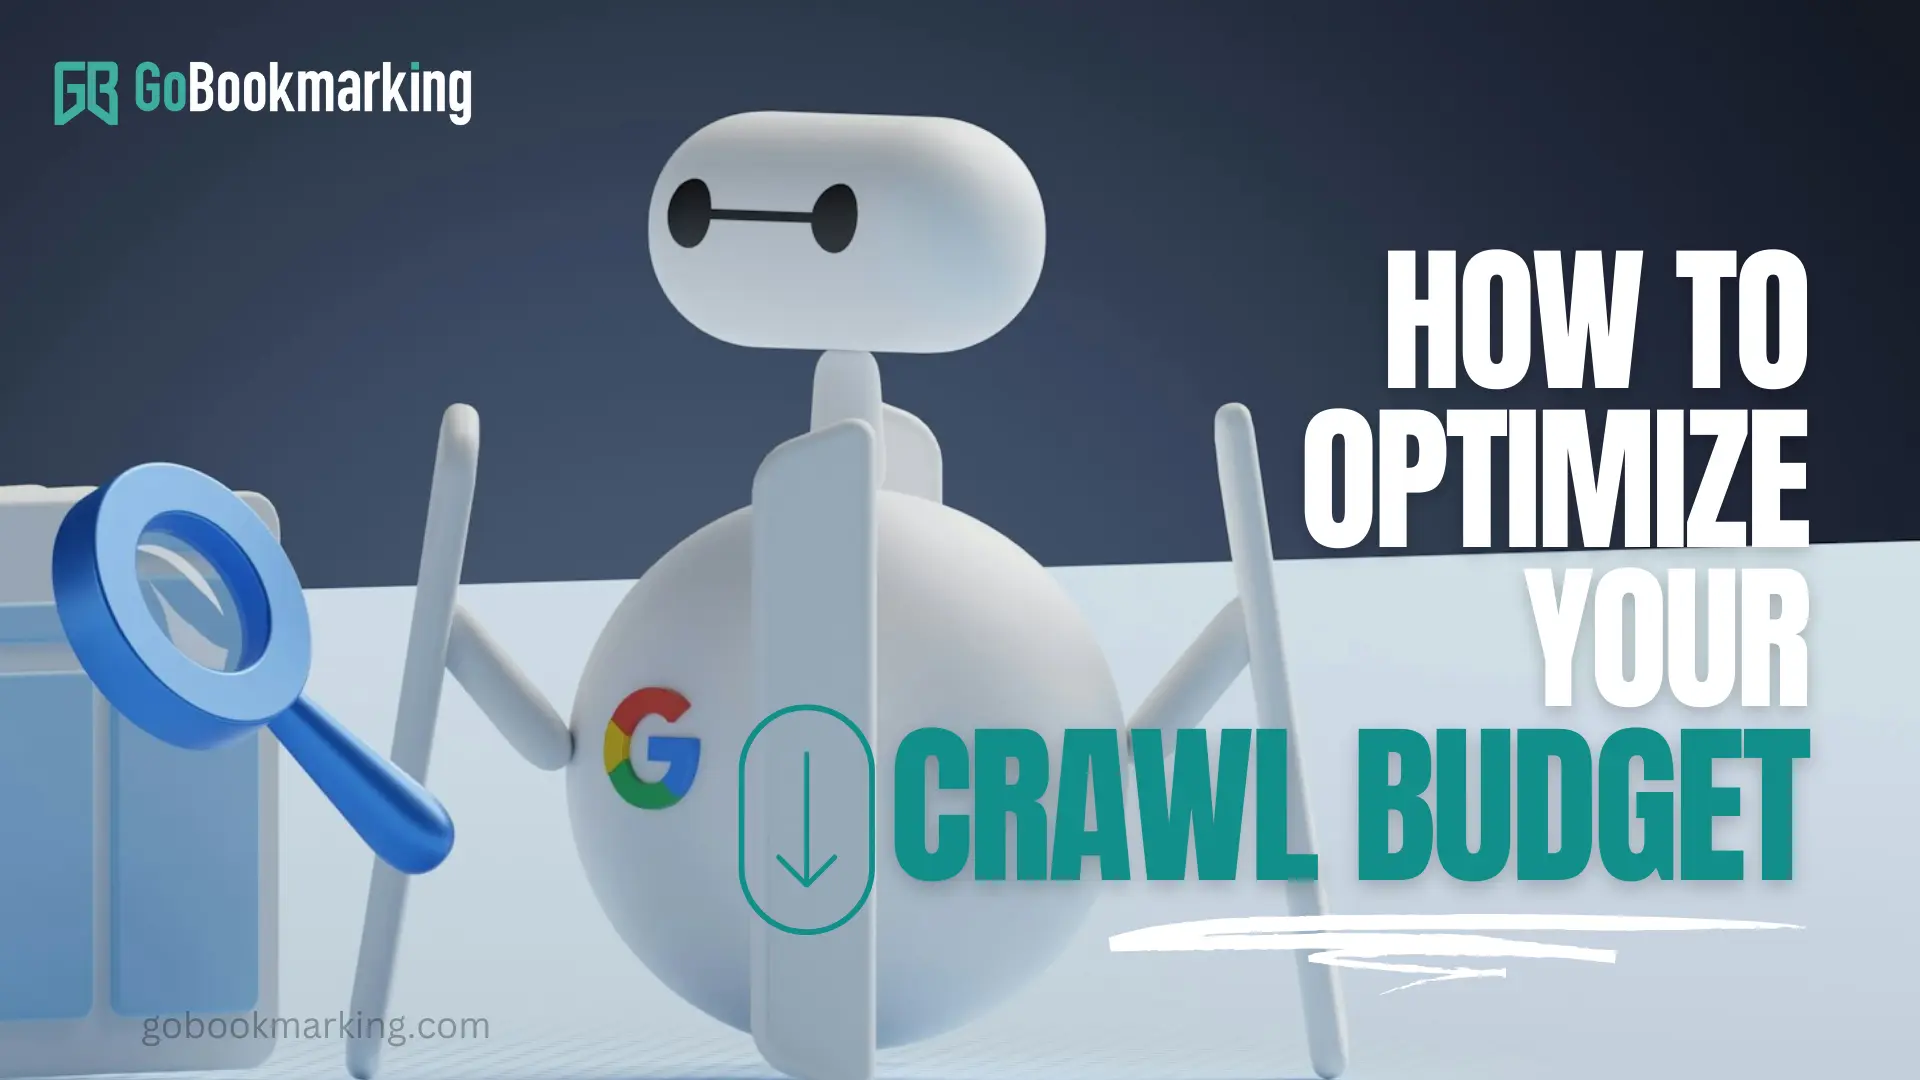 How To Optimize Your Crawl Budget?